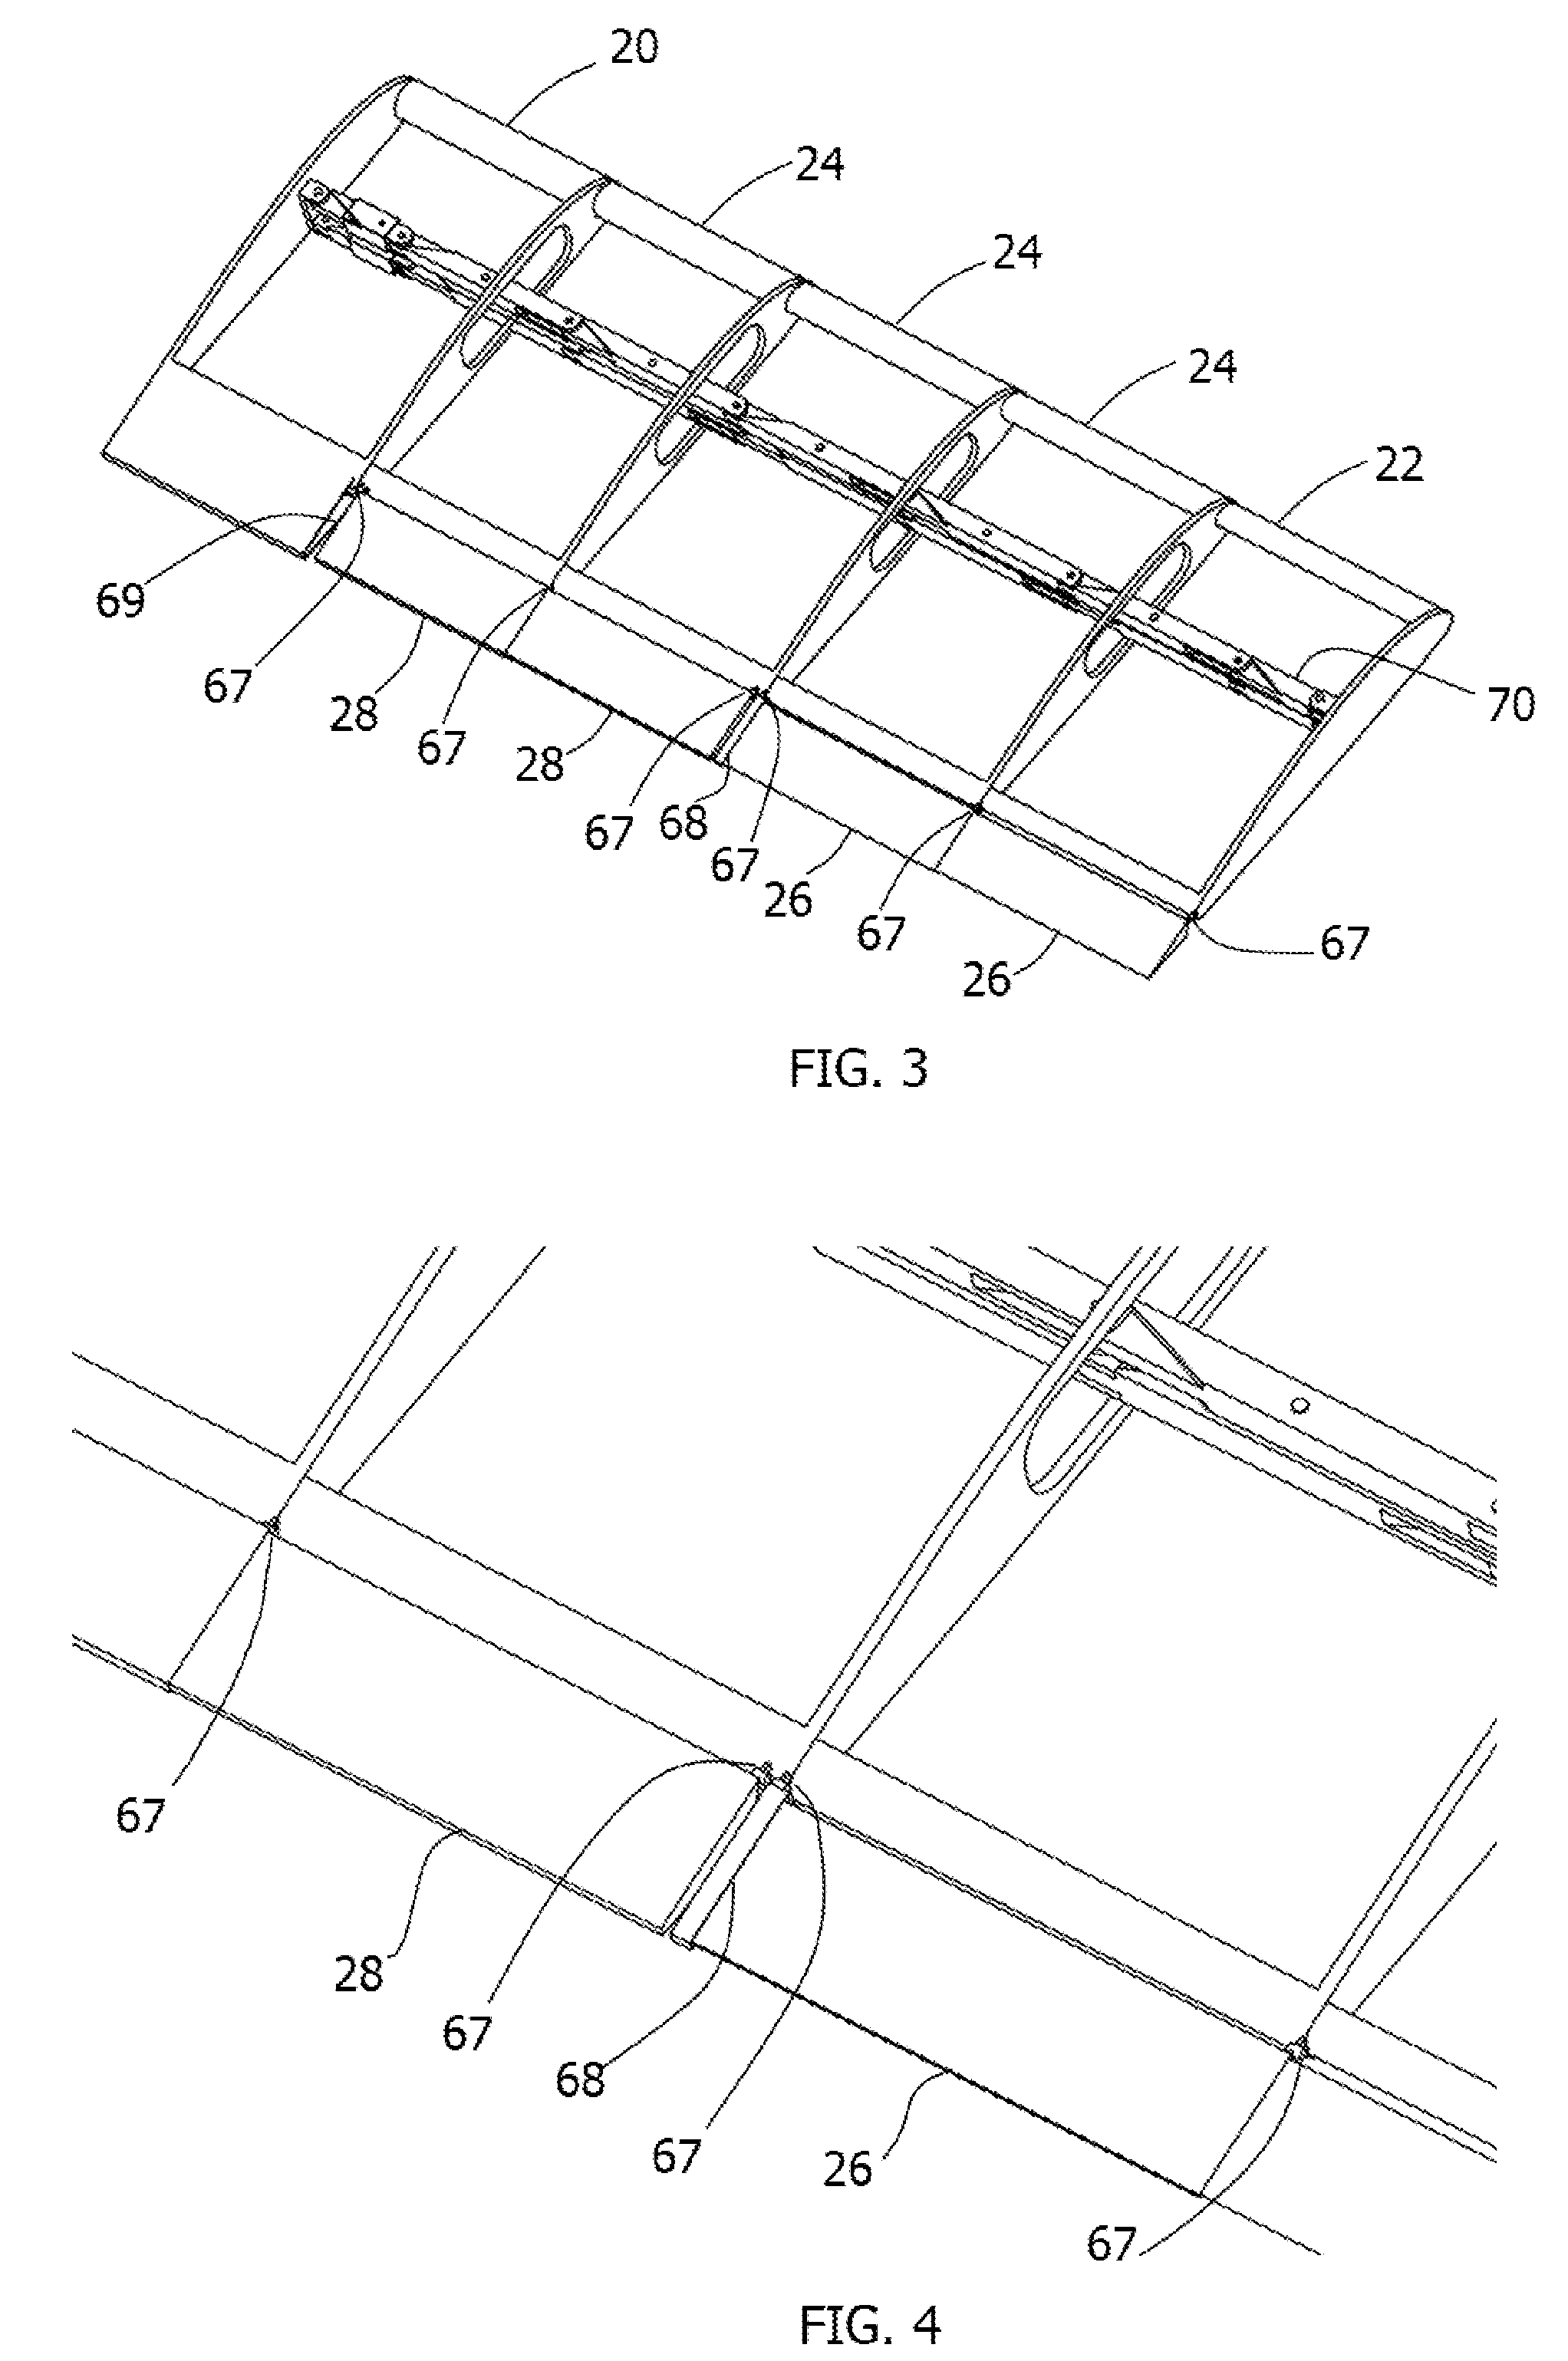 Telescopic wing with articulated structural spar